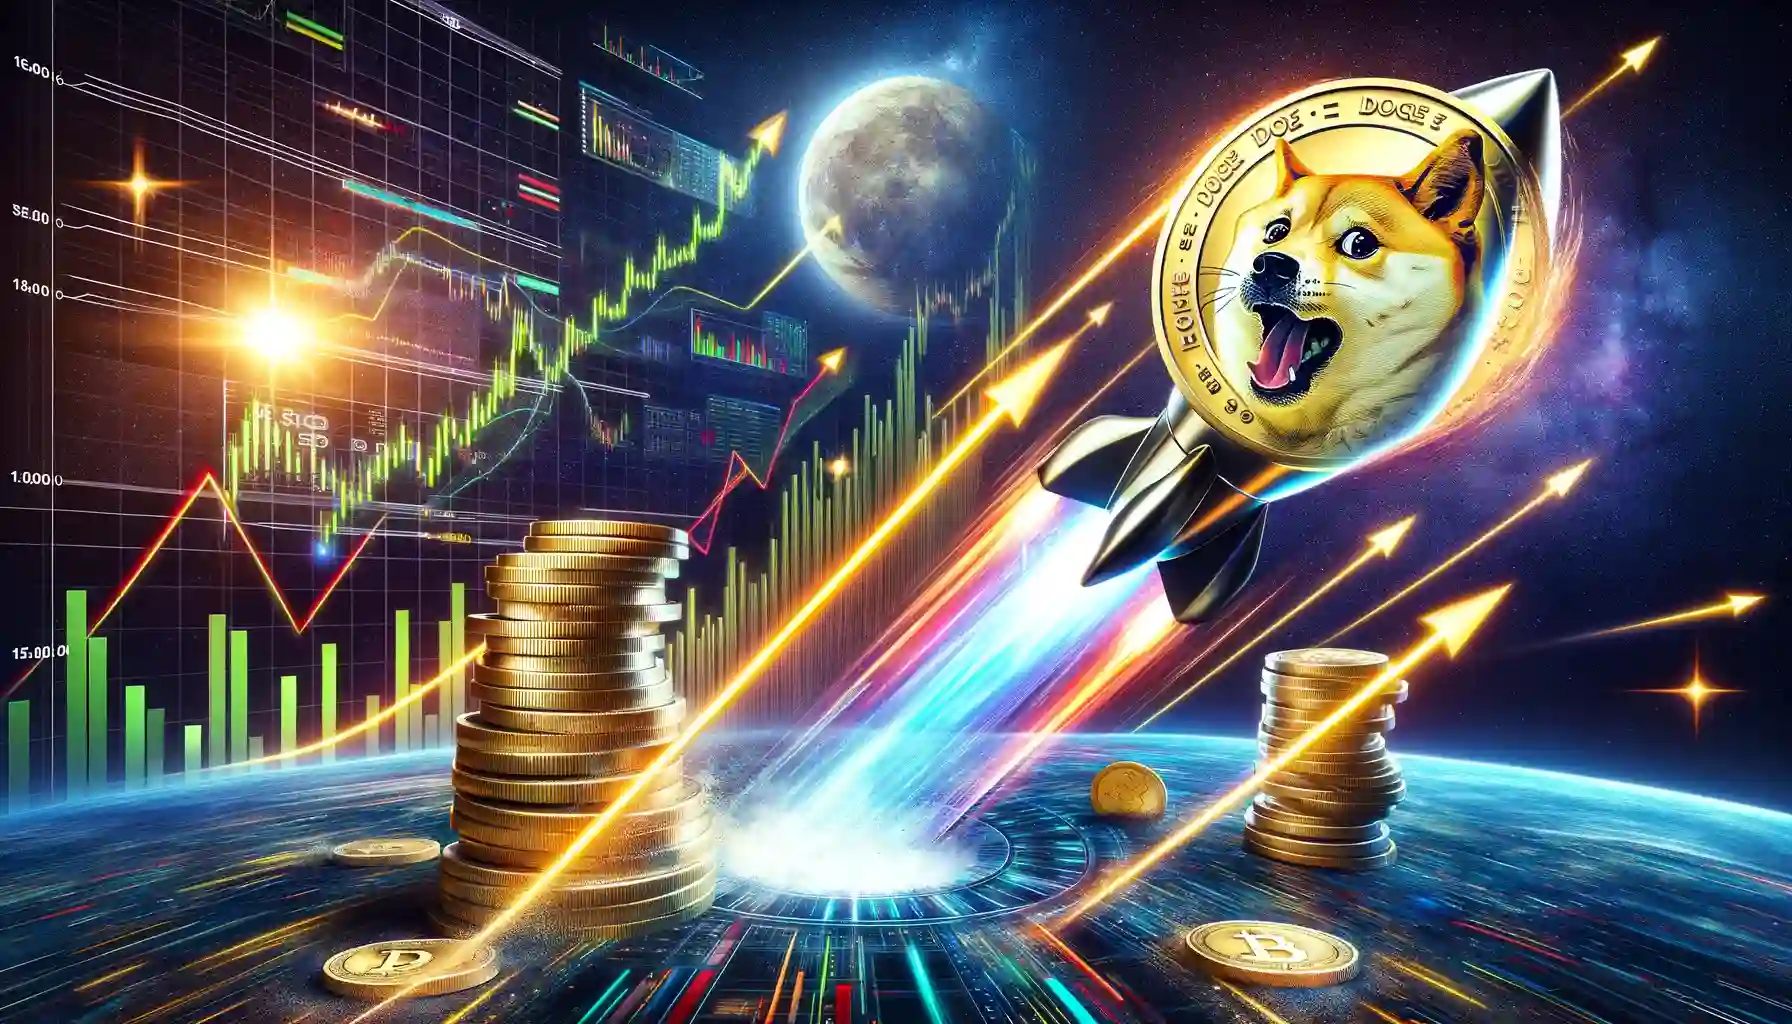 Dogecoin to the moon? Market reacts to DOGE’s 3-year price high